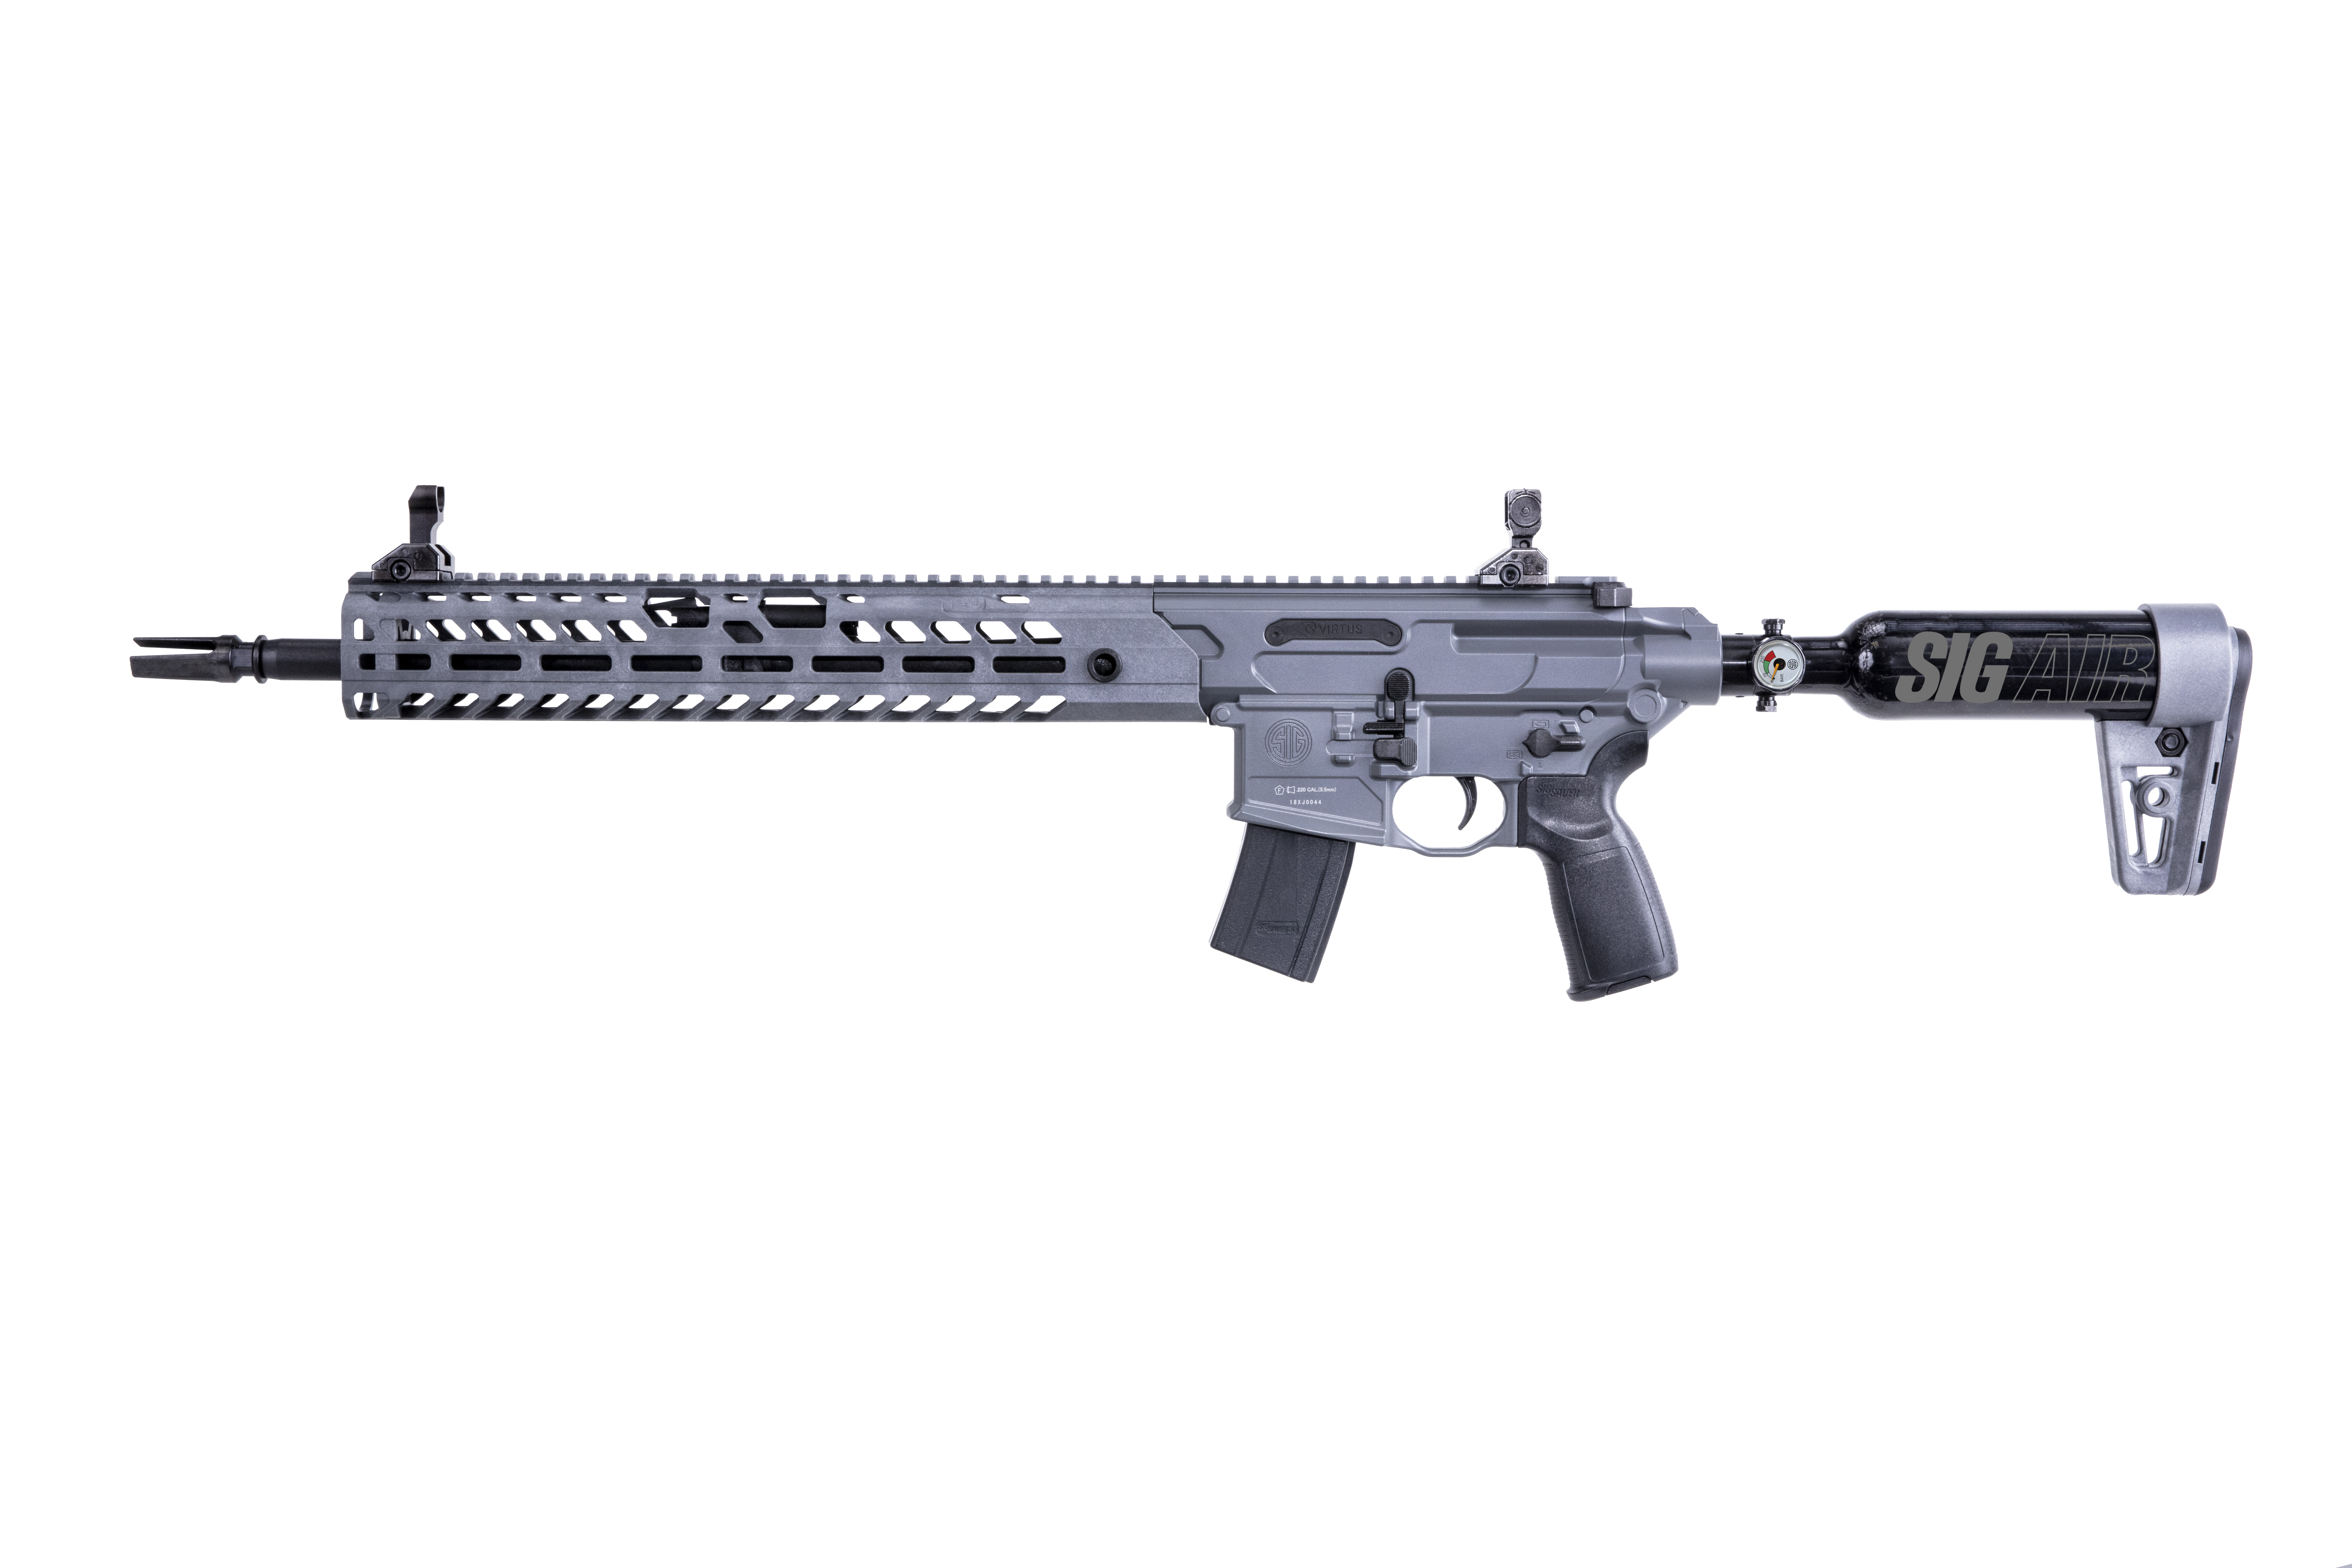 Sig AIR's first PCP air rifle is also a Virtus. Your choice, PCP and pellets or Airsoft!